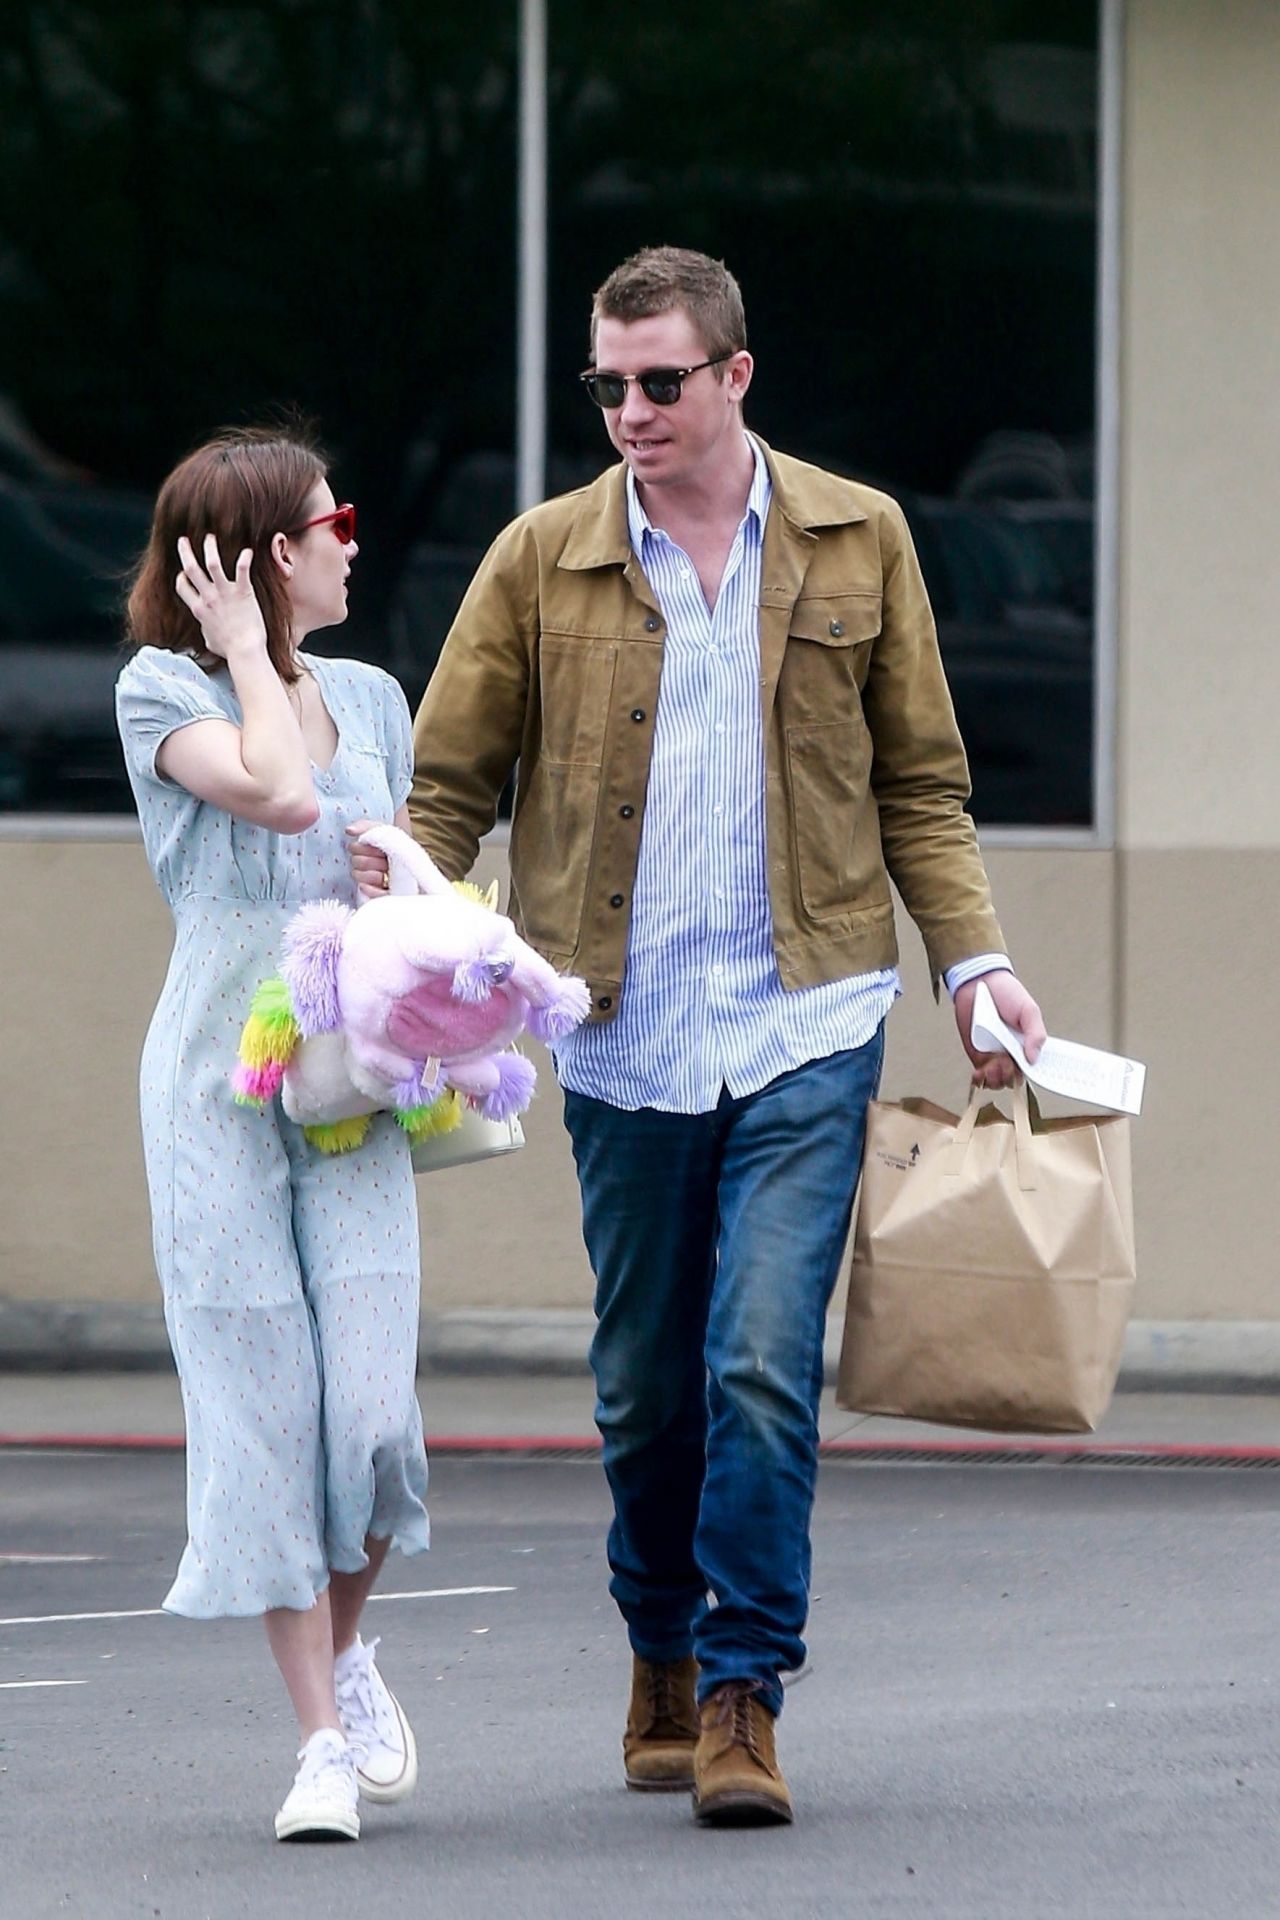 emma-roberts-shopping-on-easter-in-los-angeles-04-21-2019-8.jpg